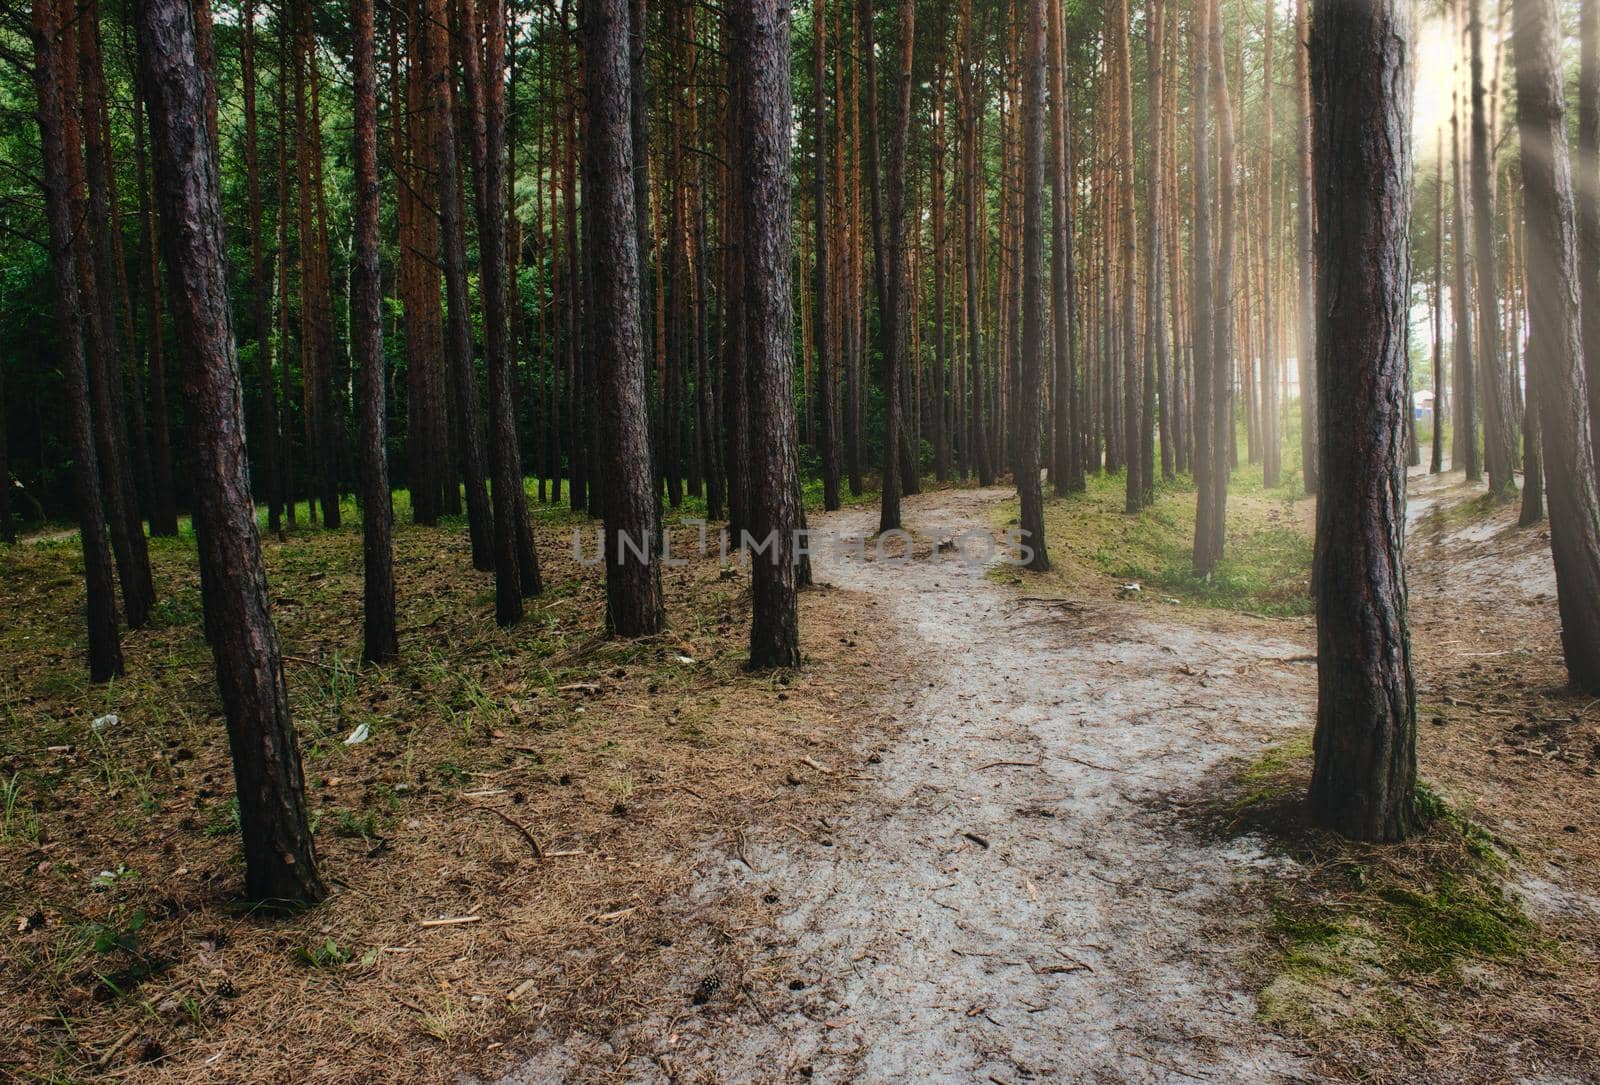 A natural path leading through the trees in a forest